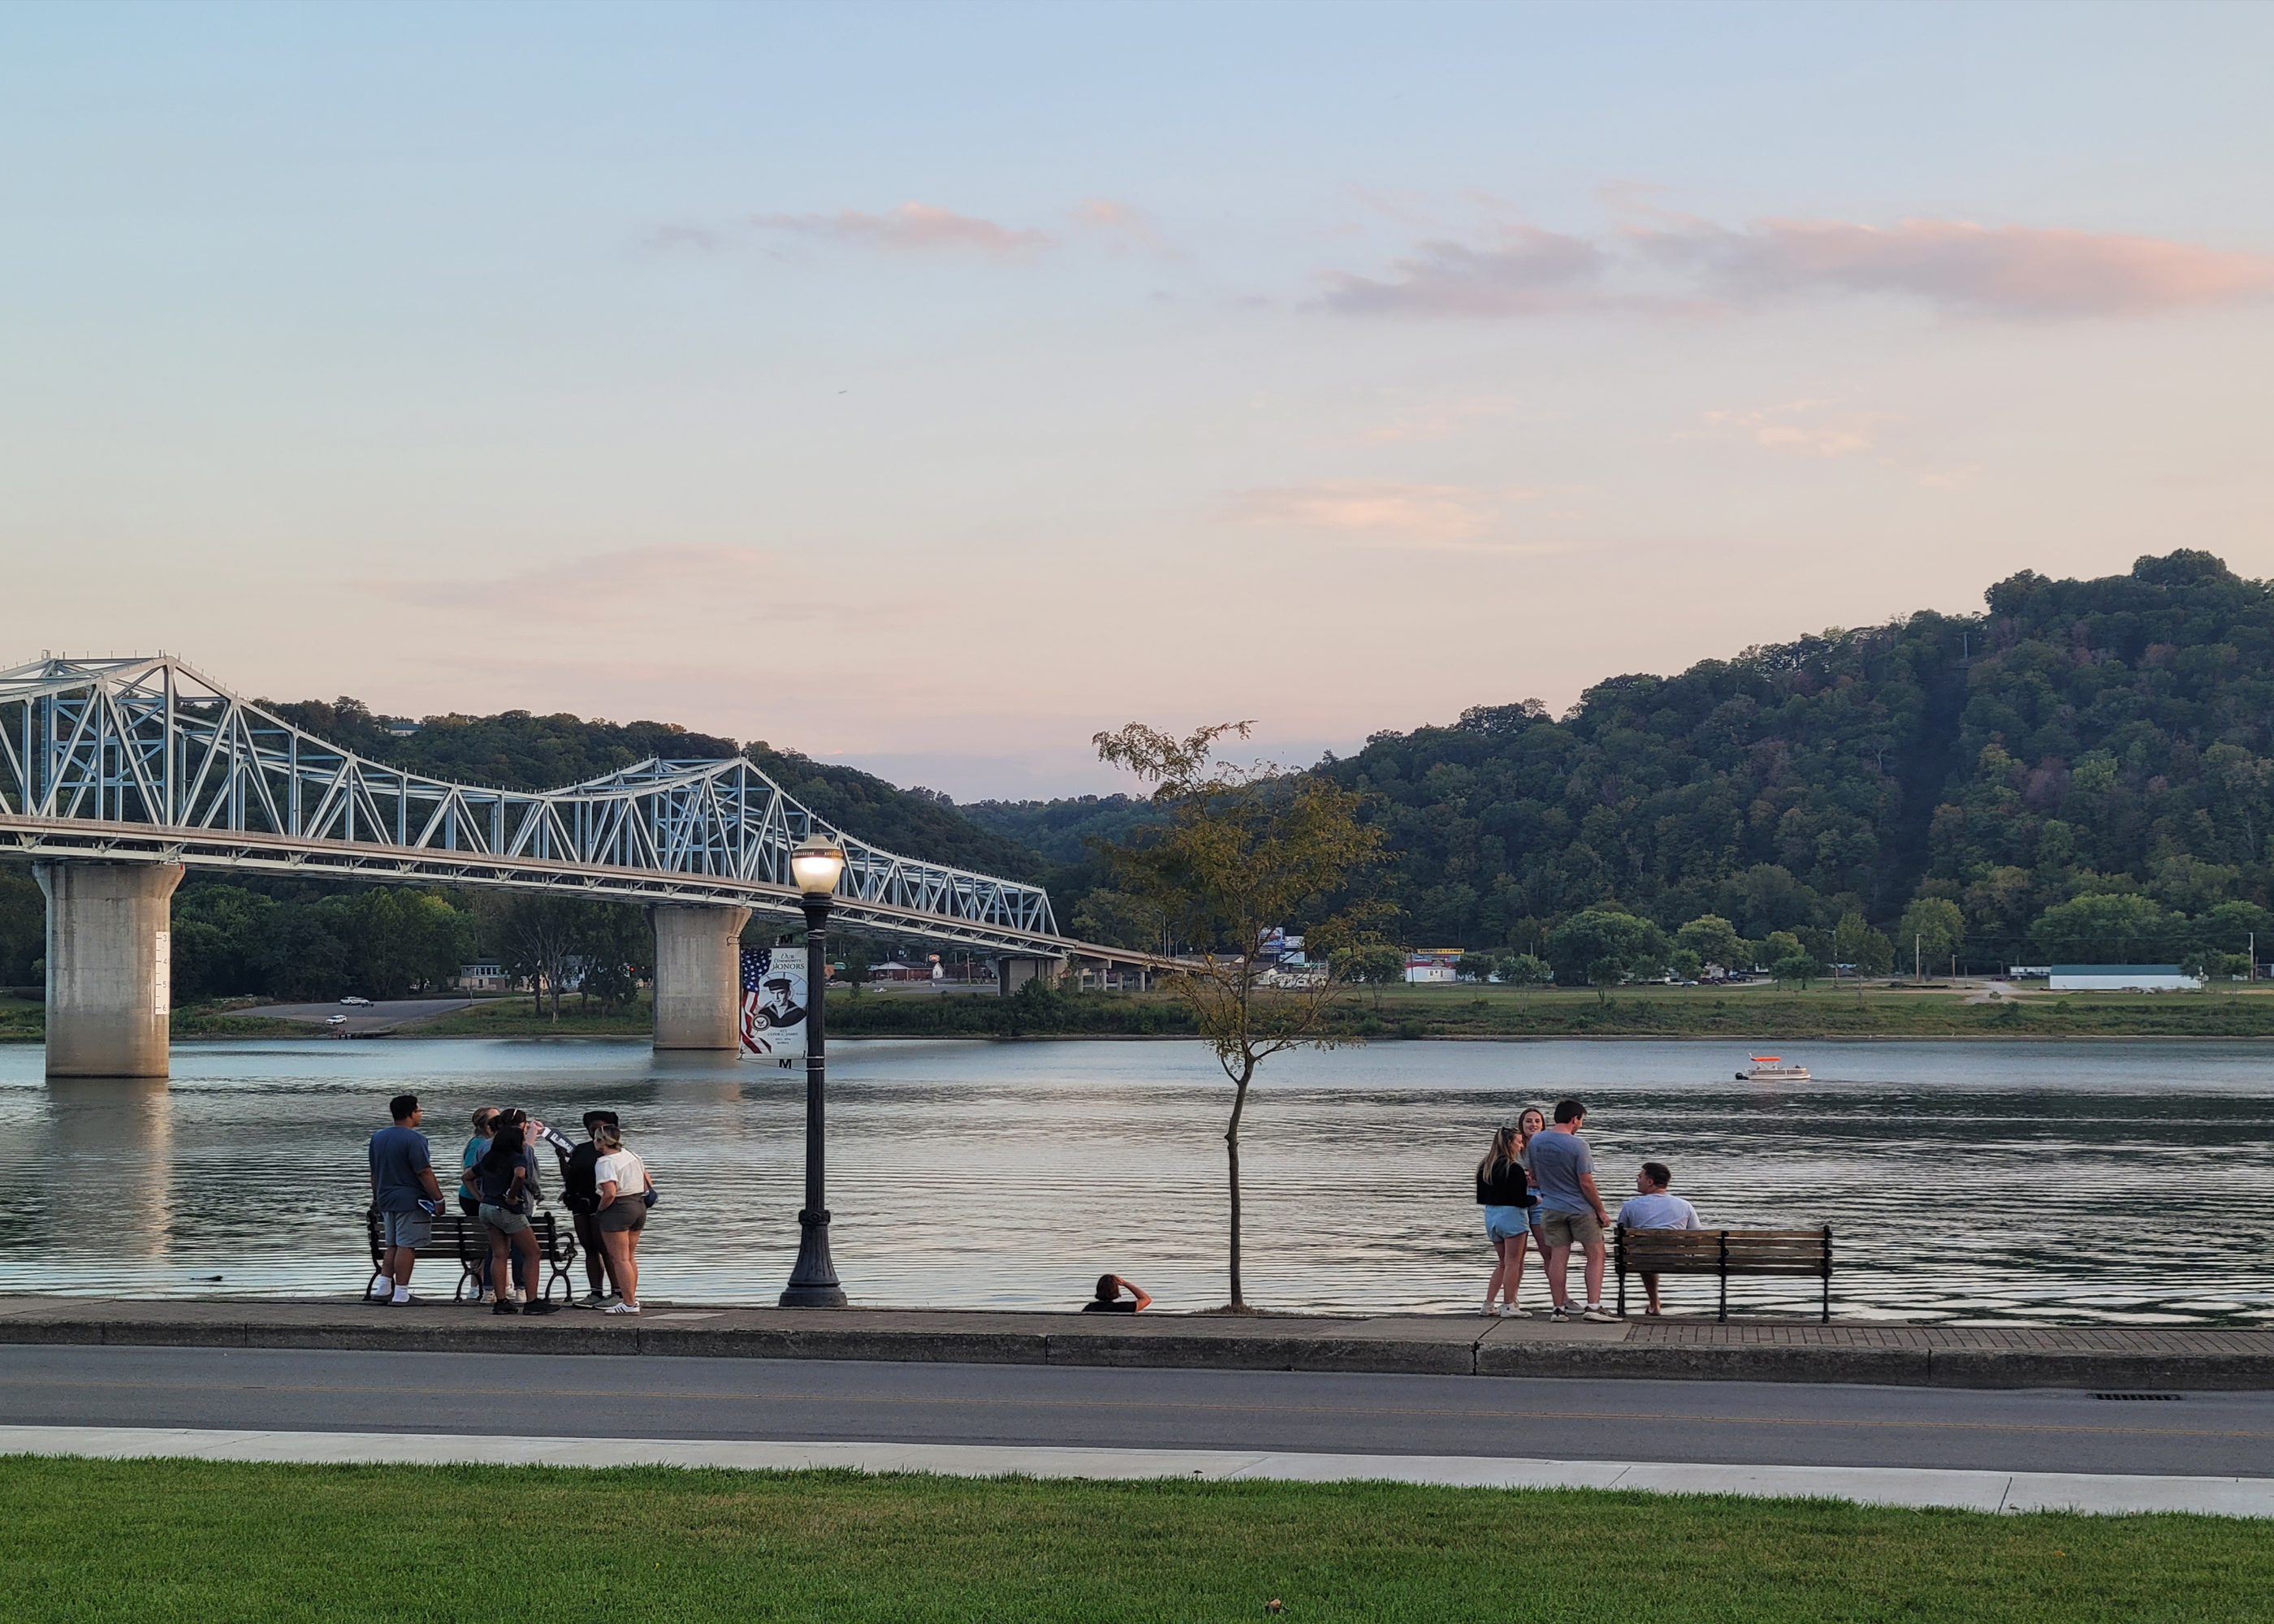 Photograph of students by the Ohio River with bridge in the background.